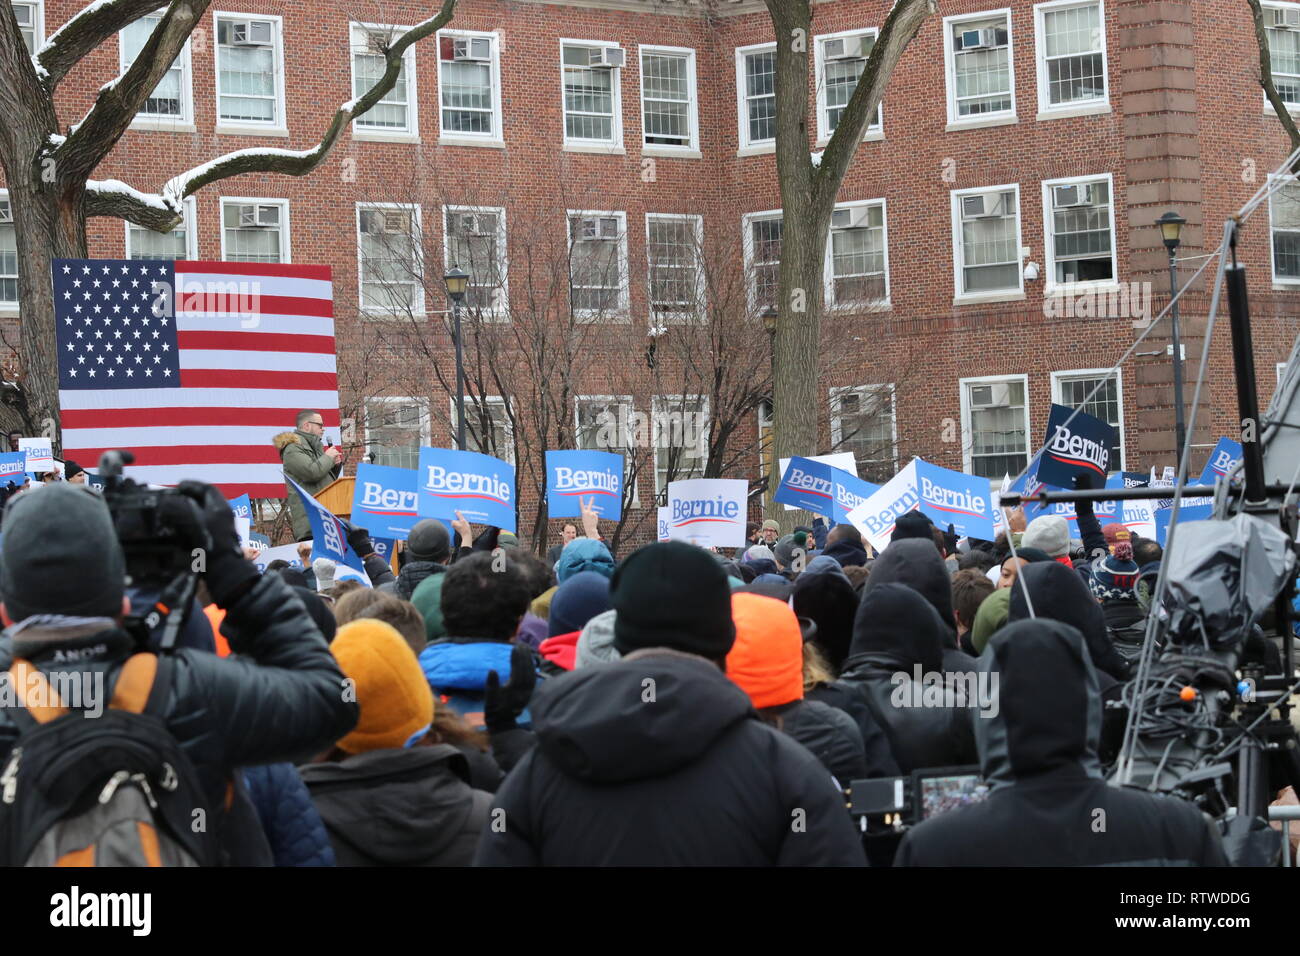 New York City, New York, USA. 2nd Mar, 2019. Returning to his native Brooklyn, NY roots on March 2, 2019, Sen. Bernie Sanders of Vermont launched his 2020 U.S. presidency bid at Brooklyn College ''“ the neighborhood school that he attended for a year before graduating from the University of Chicago in 1964. Before a large crowd of supporters on a snowy day, Sanders spoke of his humble beginnings in the area that formed his social consciousness. Credit: G. Ronald Lopez/ZUMA Wire/Alamy Live News Stock Photo